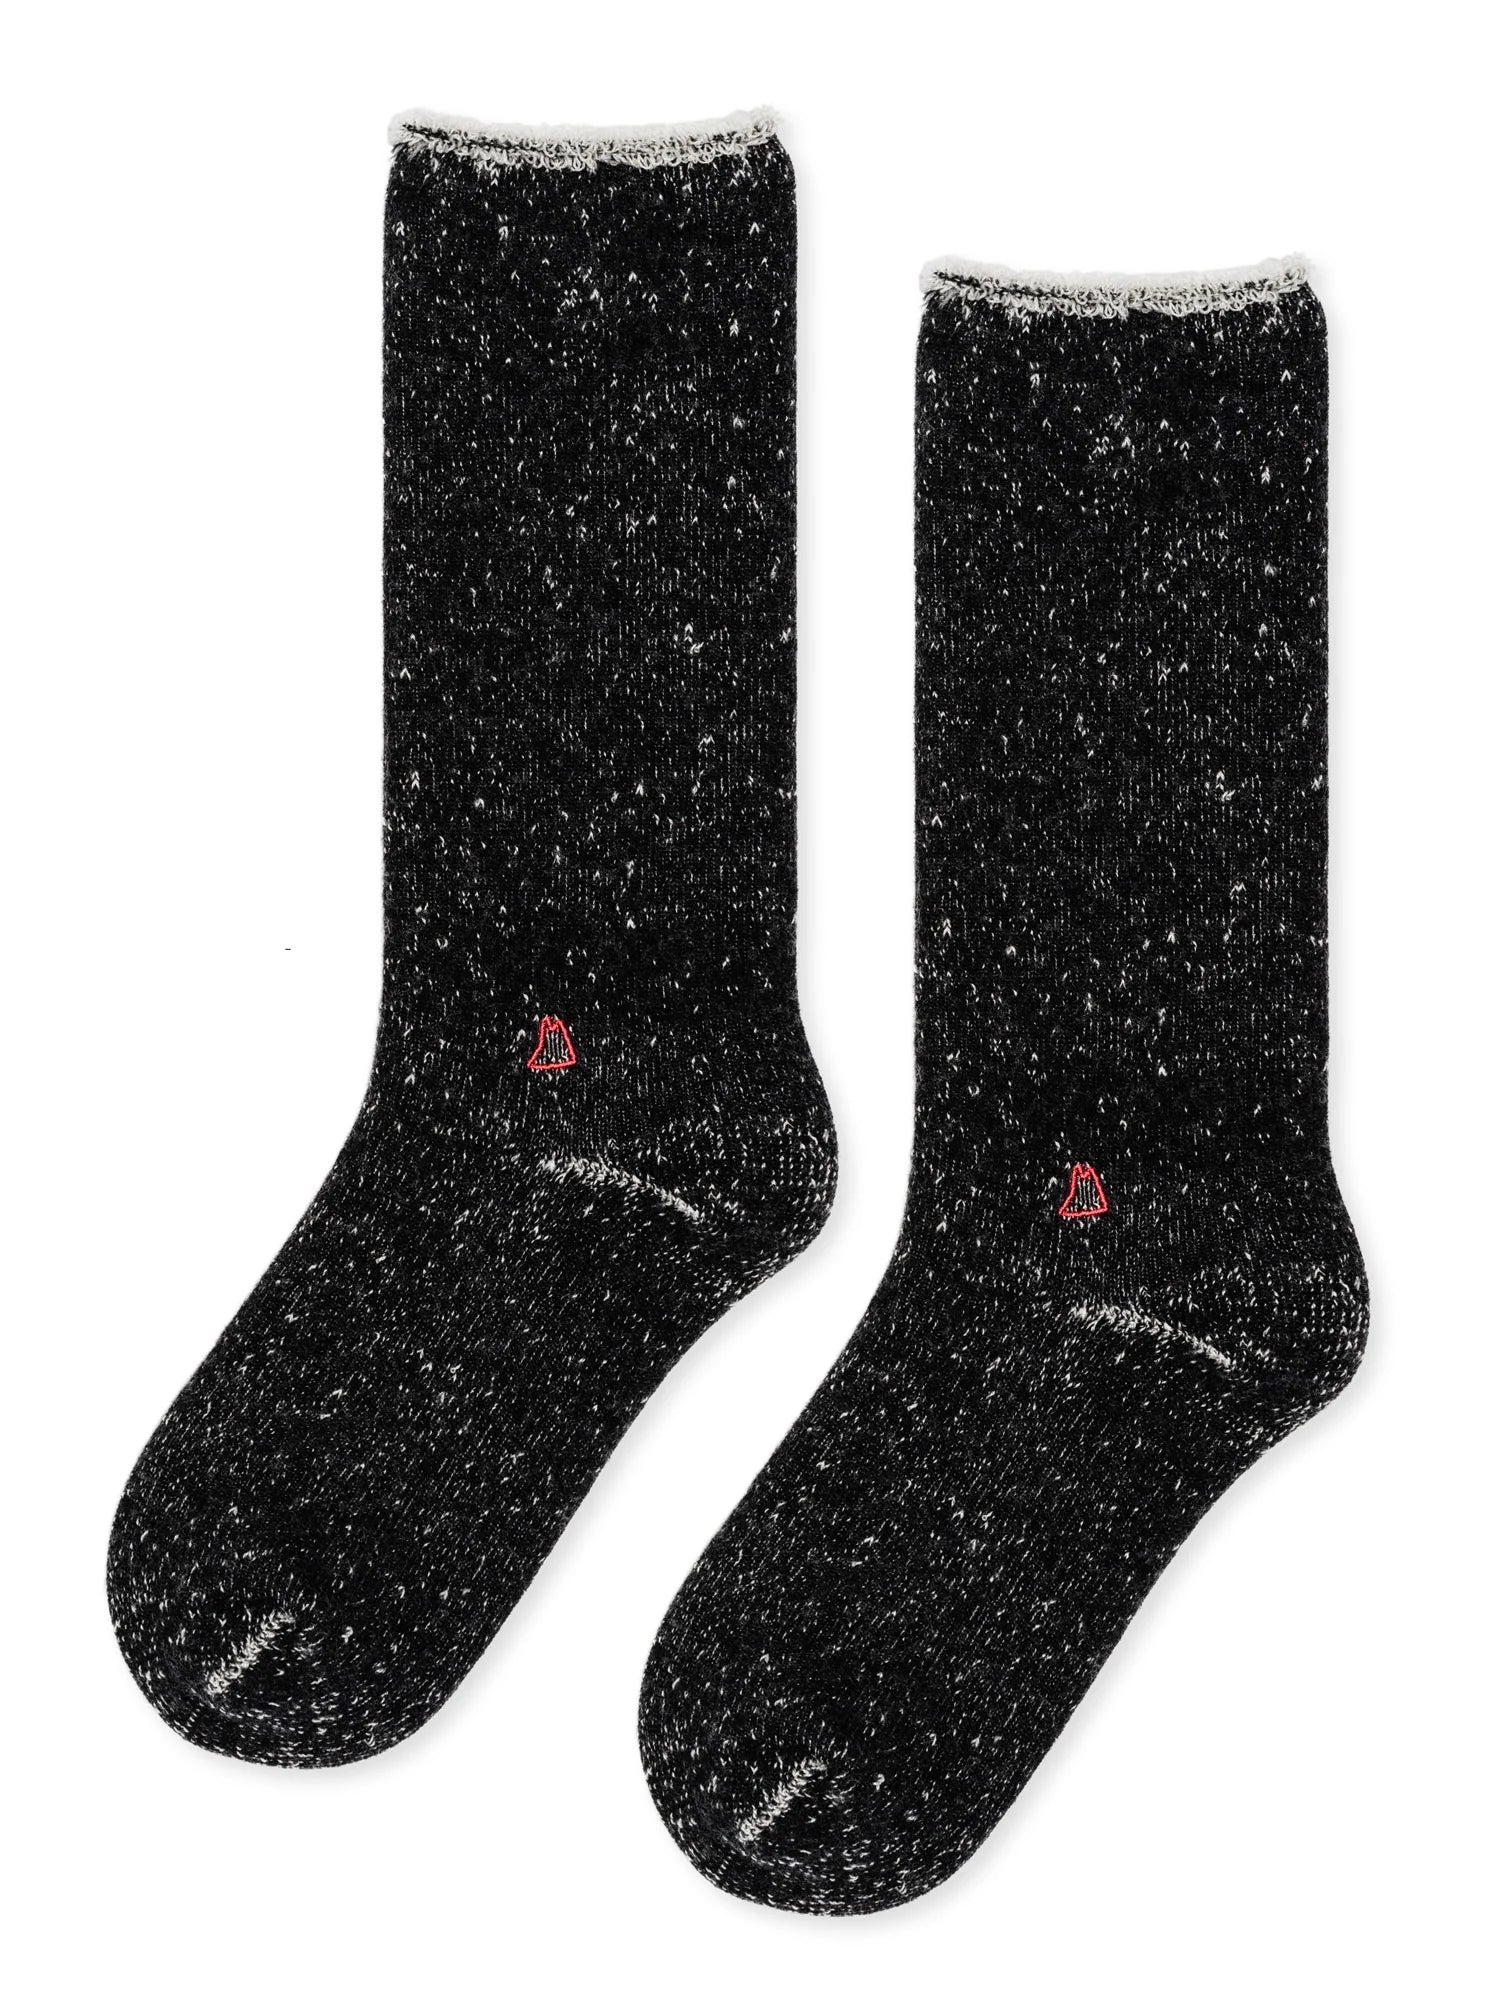 pair of black wool socks with small white flecks in the material. The pair of socks is laid flat on top of a white background. 